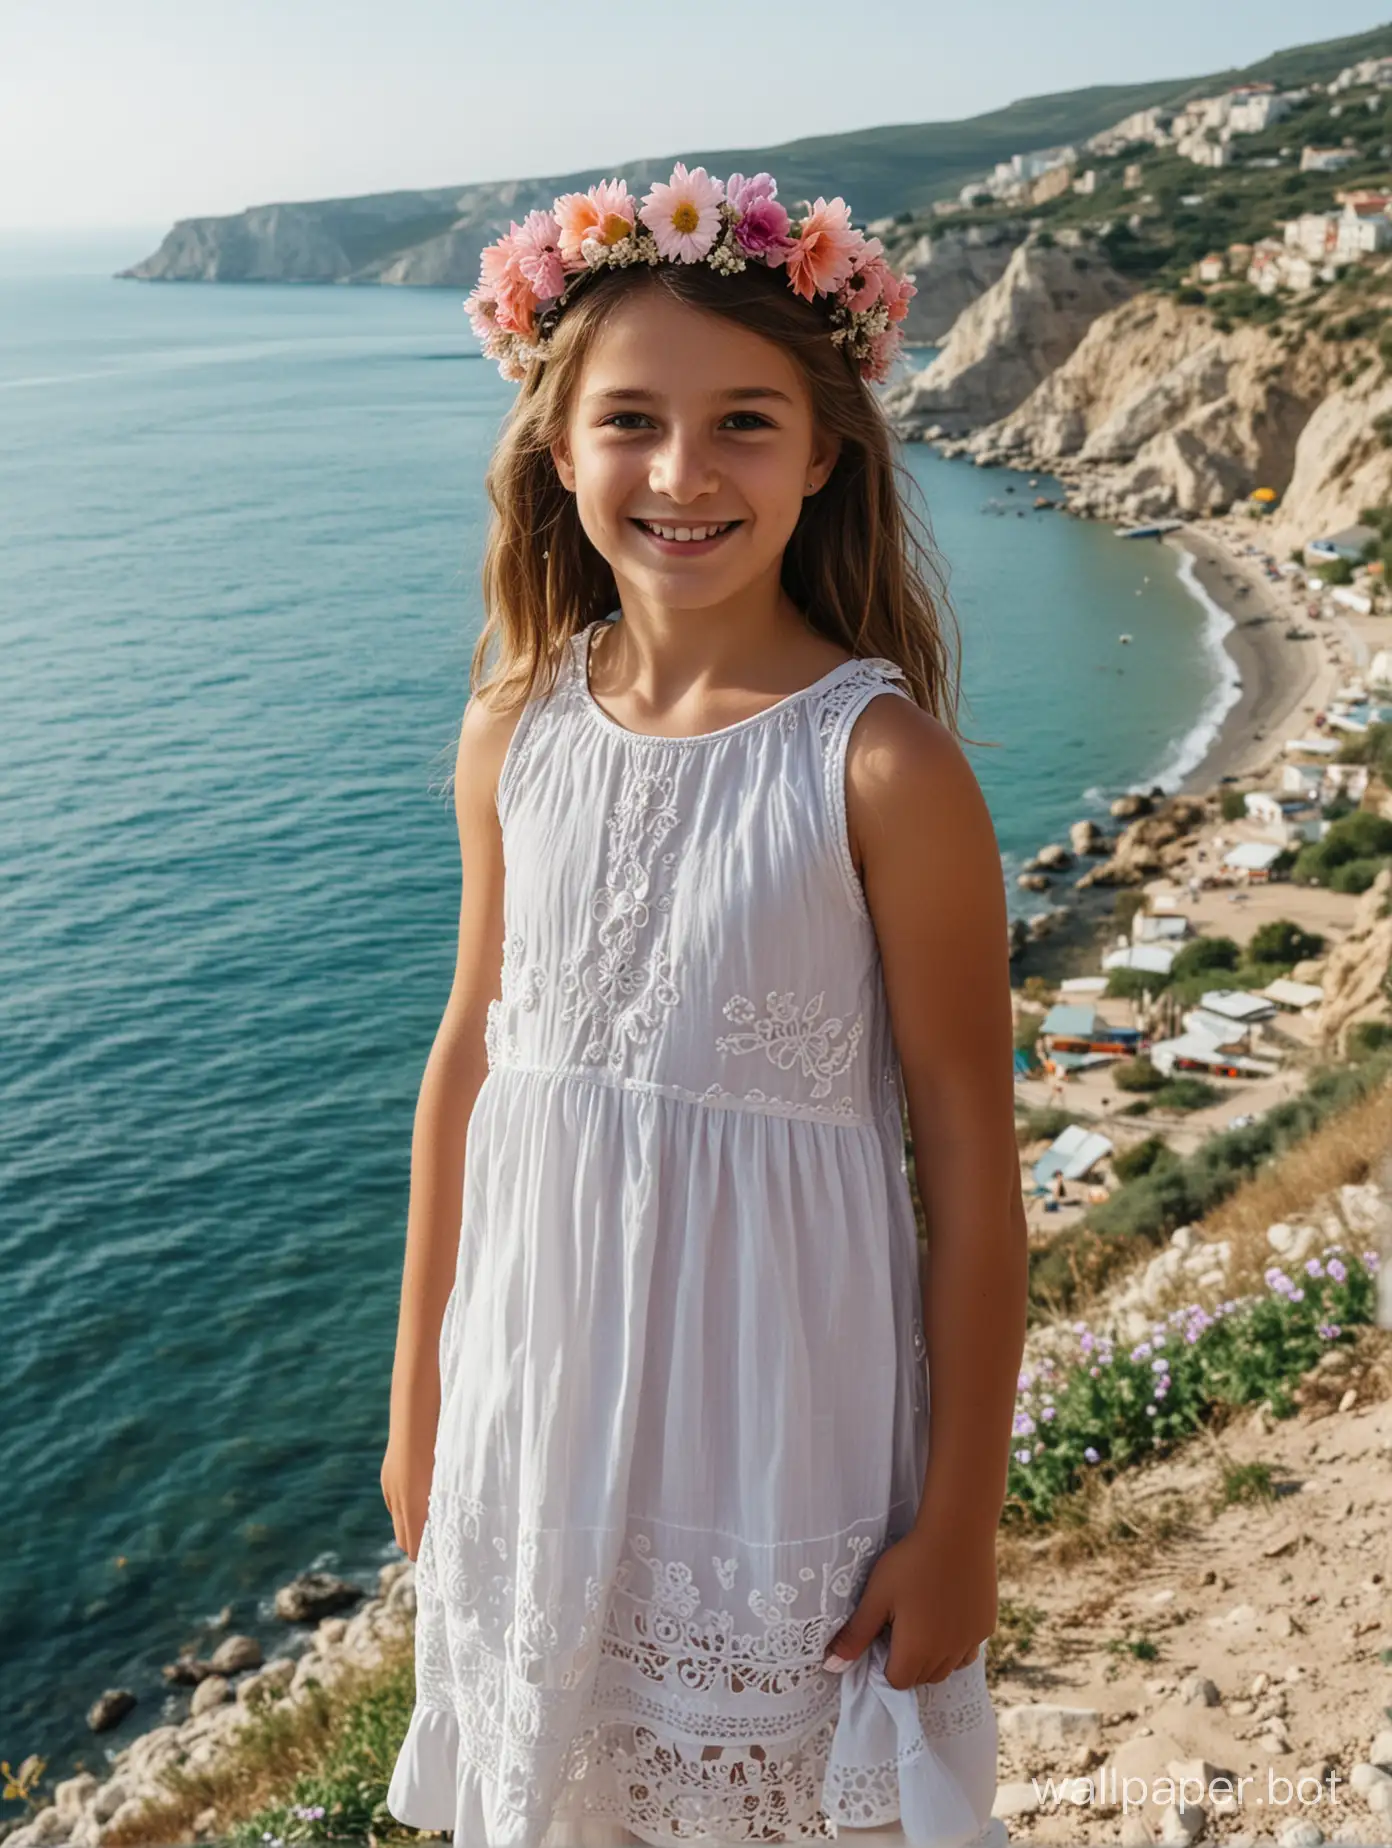 11-year-old girl, dress, flower crown on head, full height, smile, Crimea, view of the sea